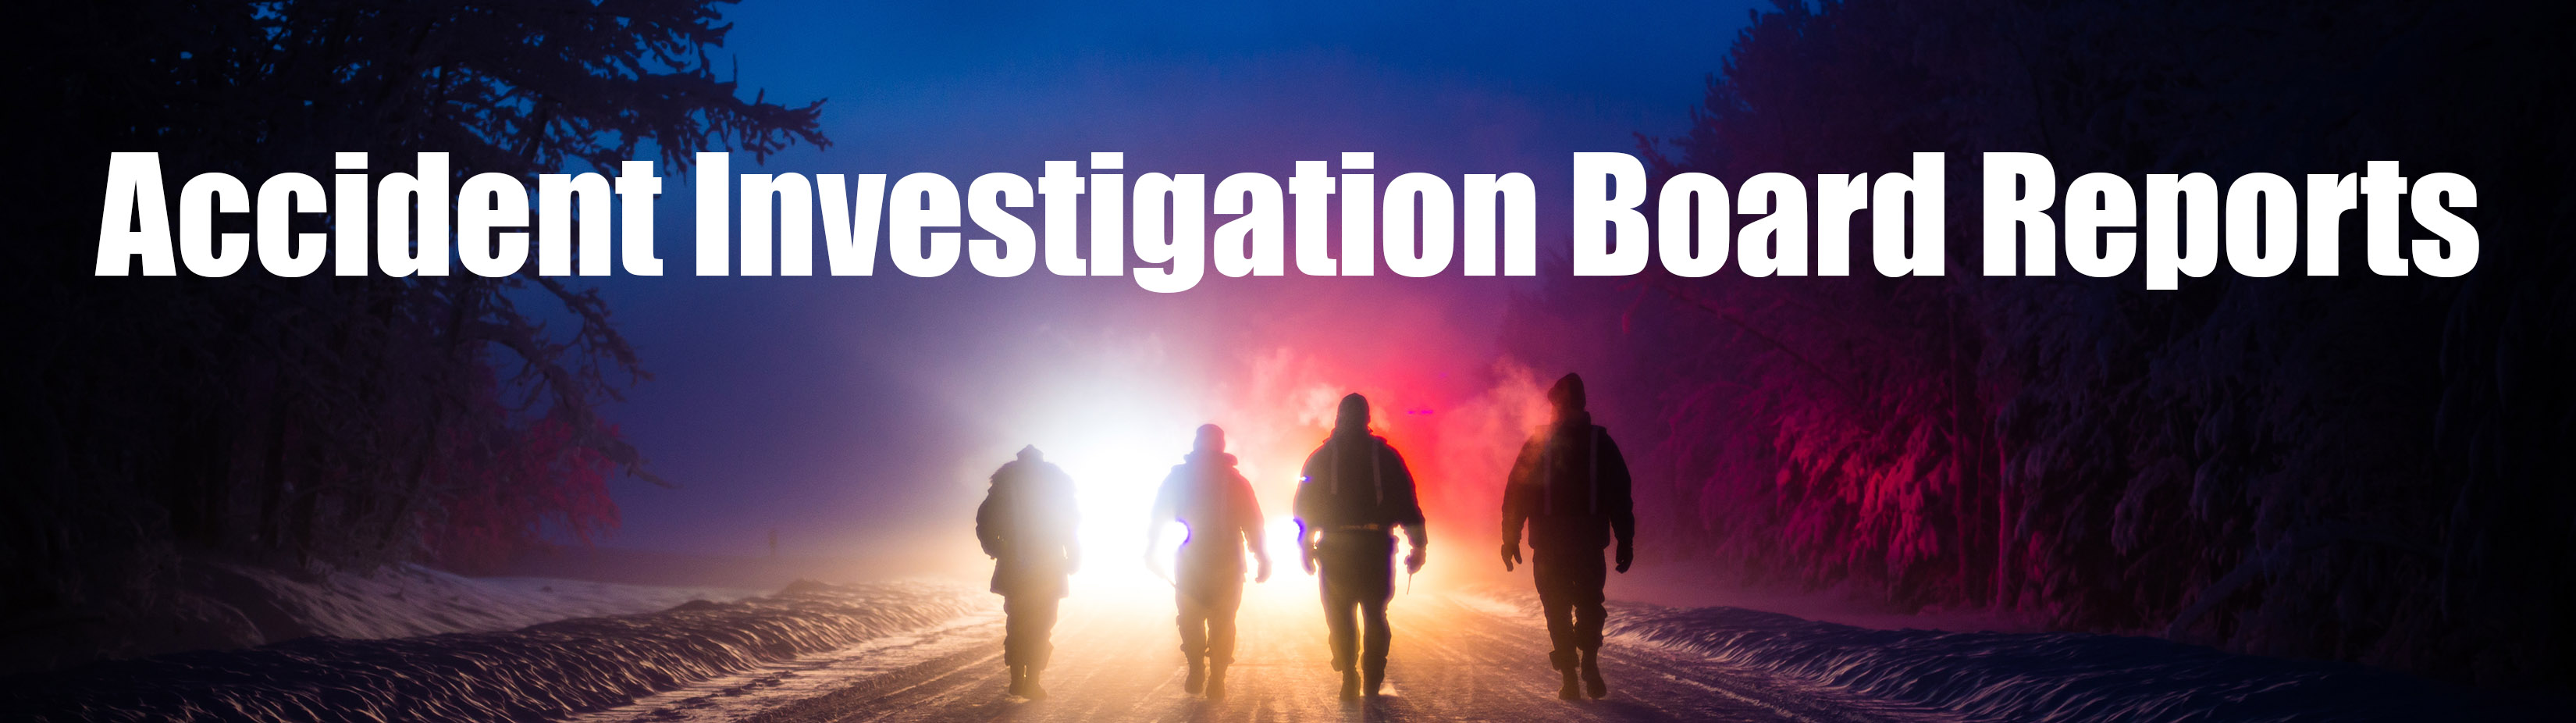 Link to Accident Investigation Board Reports